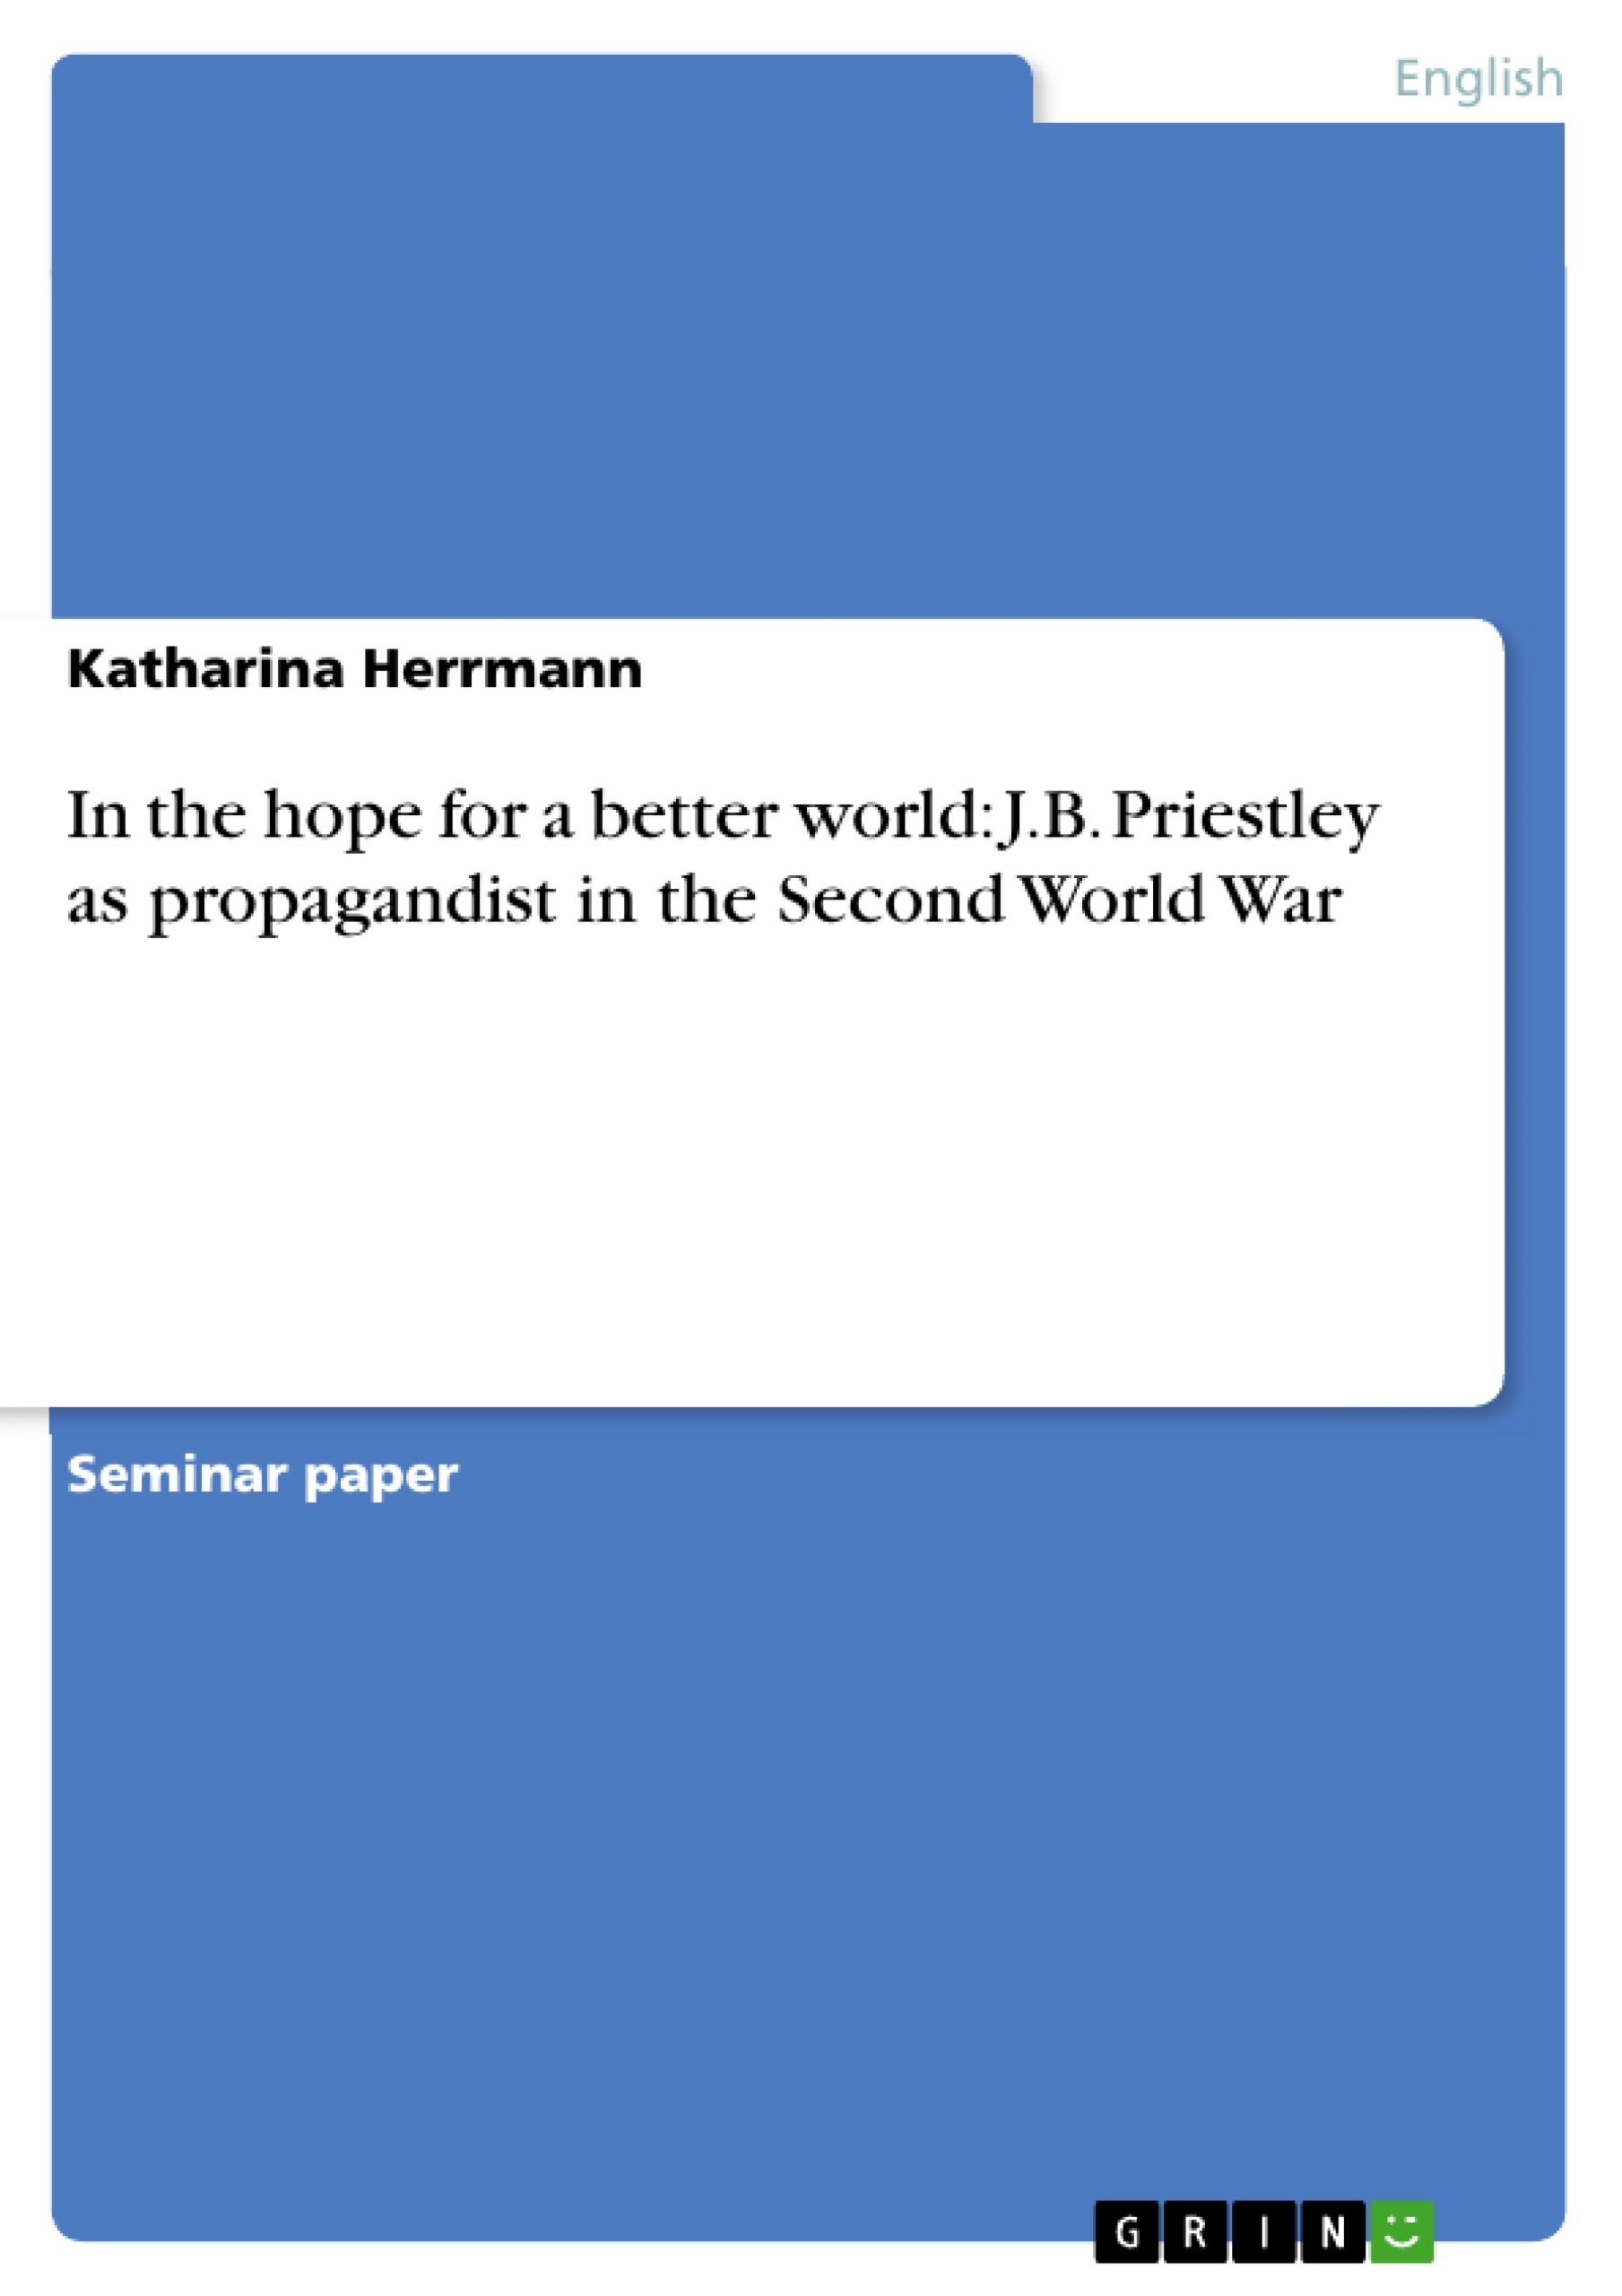 Title: In the hope for a better world: J.B. Priestley as propagandist in the Second World War